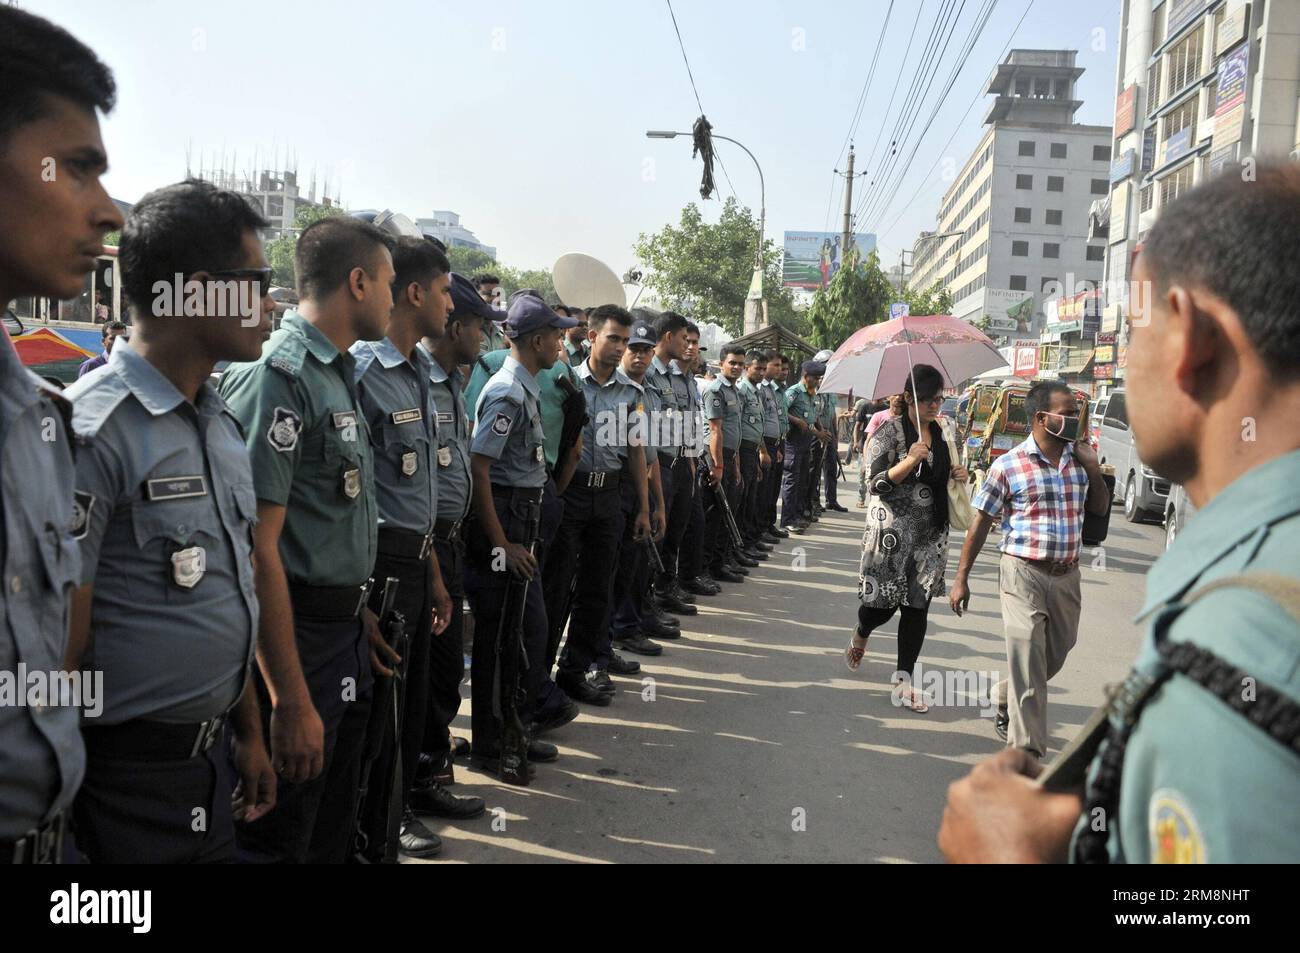 (140422) -- DHAKA, April 22, 2014 (Xinhua) -- Policemen stand guard on a street during a long march in Dhaka, Bangladesh, April 22, 2014. Demanding equitable share of common Teesta river water from India, Bangladesh Nationalist Party (BNP) started its two-day road march towards a barrage on Teesta river in an area bordering Lalmonirhat district, some 343 km northwest of Dhaka. (Xinhua/Shariful Islam) BANGLADESH-DHAKA-PROTEST PUBLICATIONxNOTxINxCHN   Dhaka April 22 2014 XINHUA Policemen stand Guard ON a Street during a Long March in Dhaka Bangladesh April 22 2014 demanding Equitable Share of Co Stock Photo